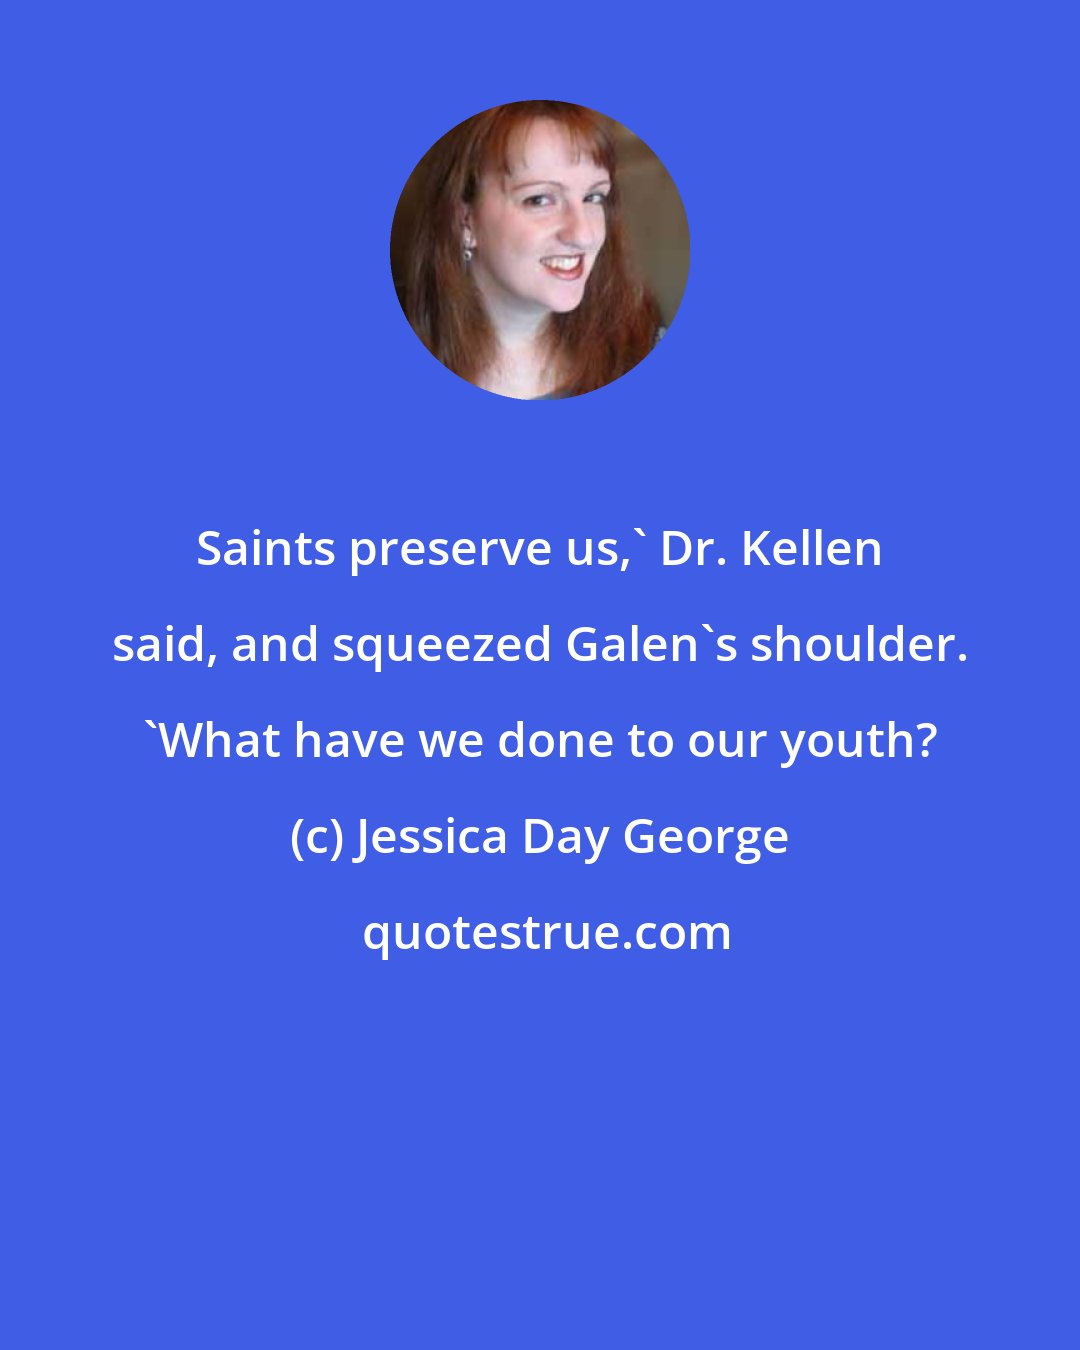 Jessica Day George: Saints preserve us,' Dr. Kellen said, and squeezed Galen's shoulder. 'What have we done to our youth?